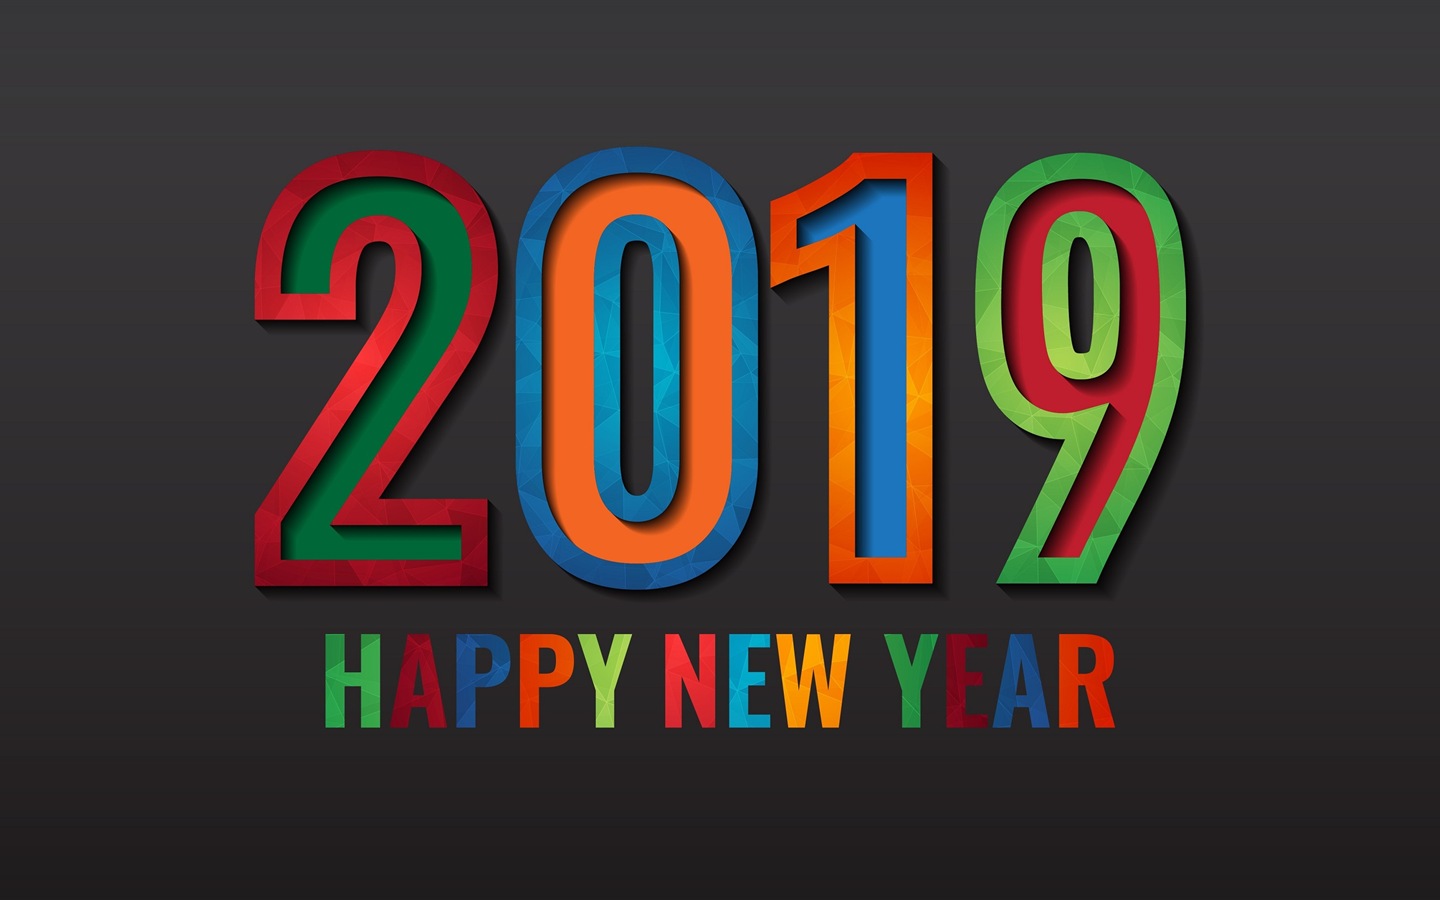 Happy New Year 2019 HD wallpapers #6 - 1440x900